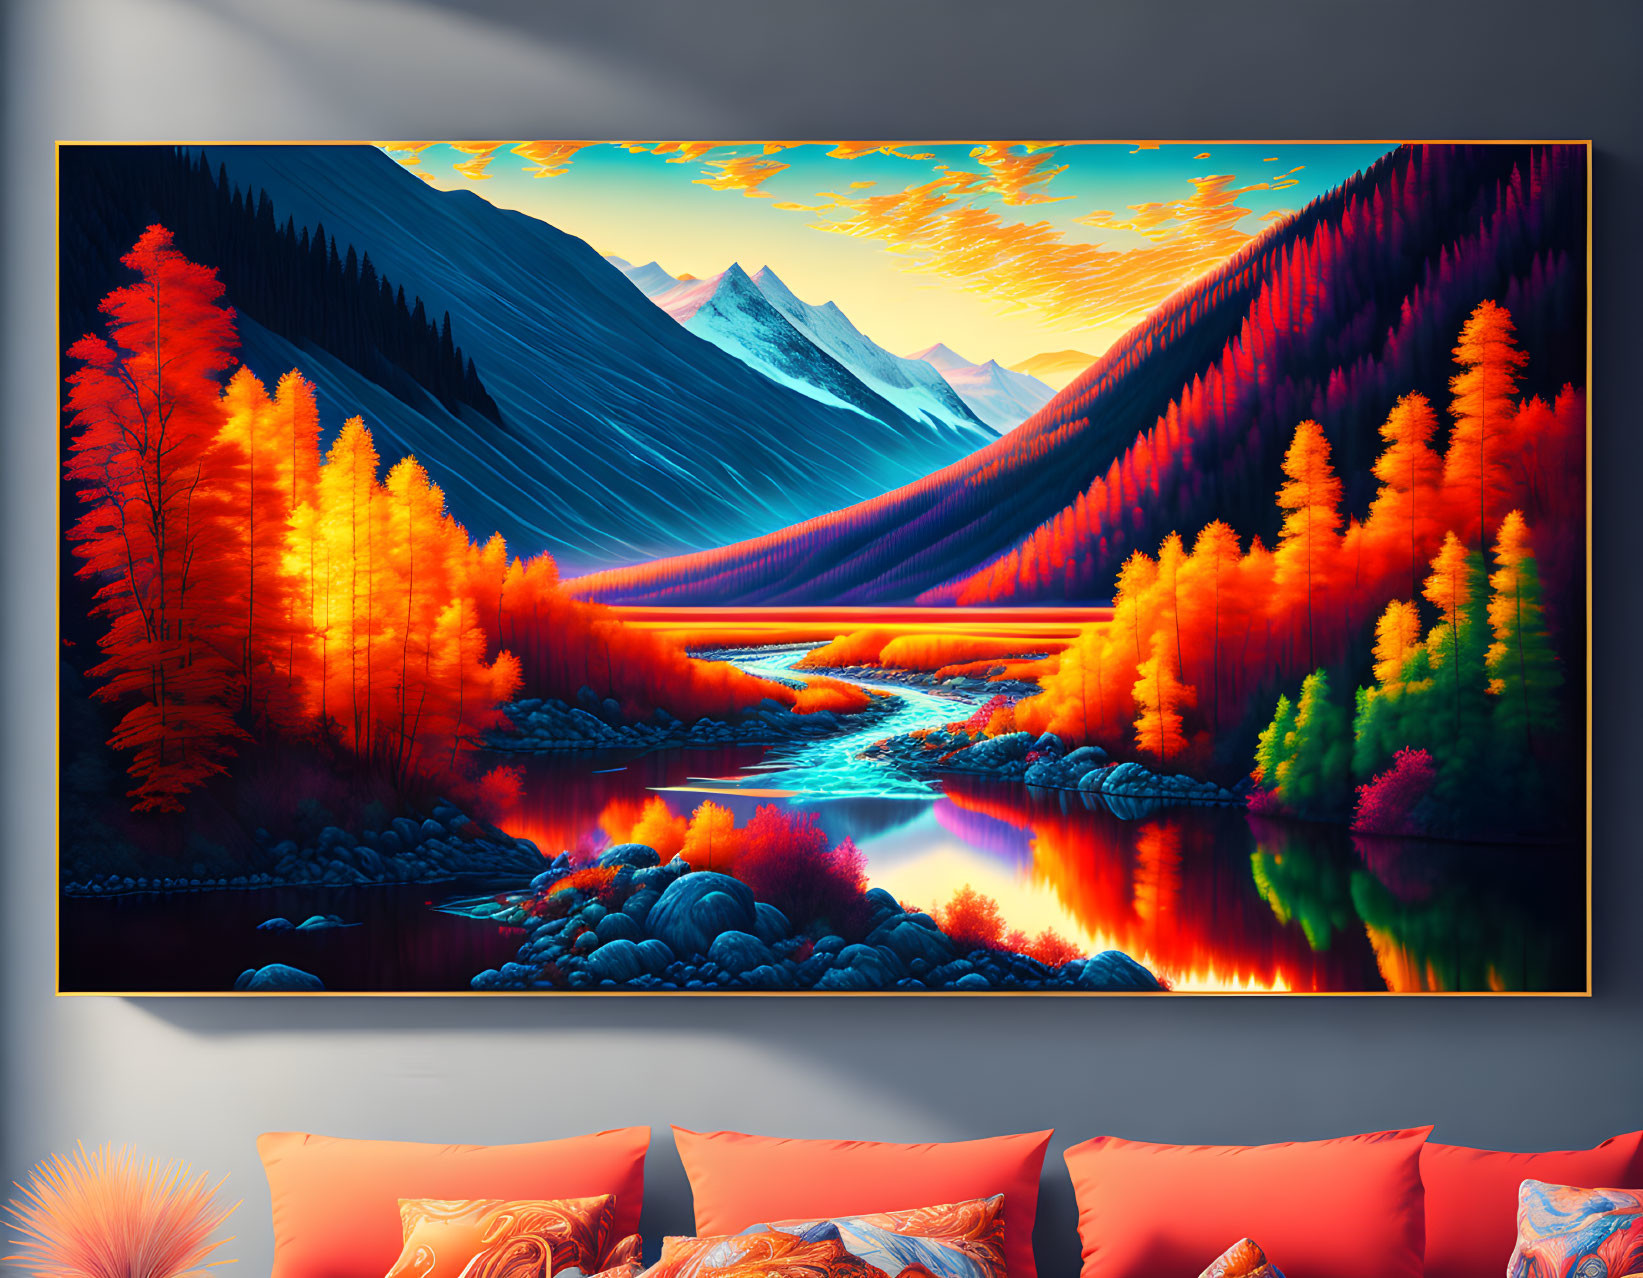 Colorful Autumn Mountain Landscape with River and Snowy Peaks